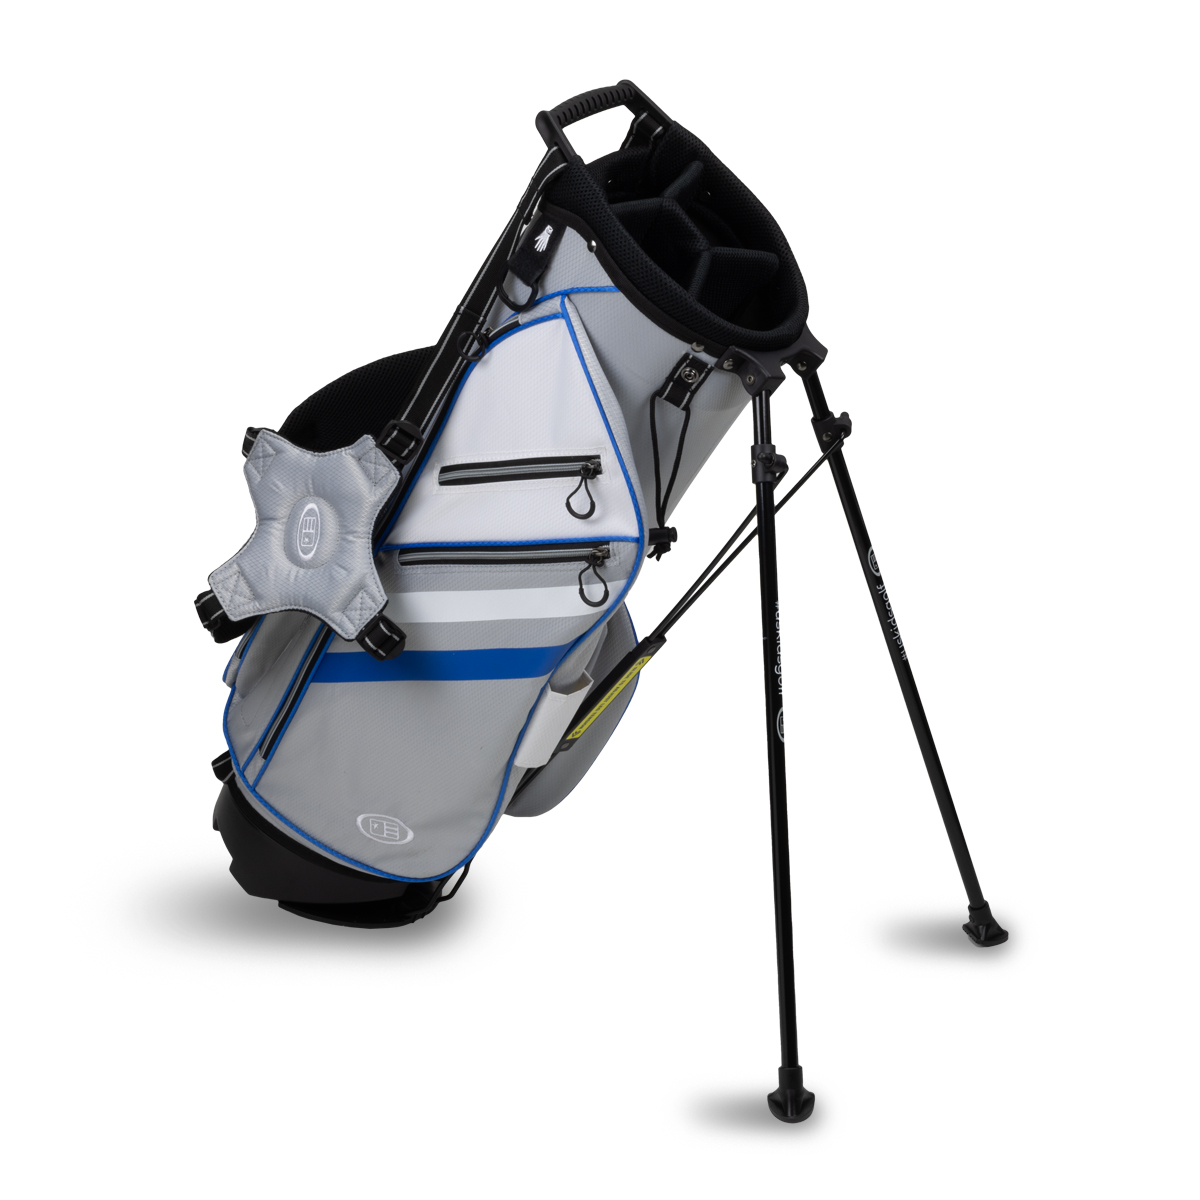 TS5-63  Stand Bag  33.5 inch, Silver/White Bag